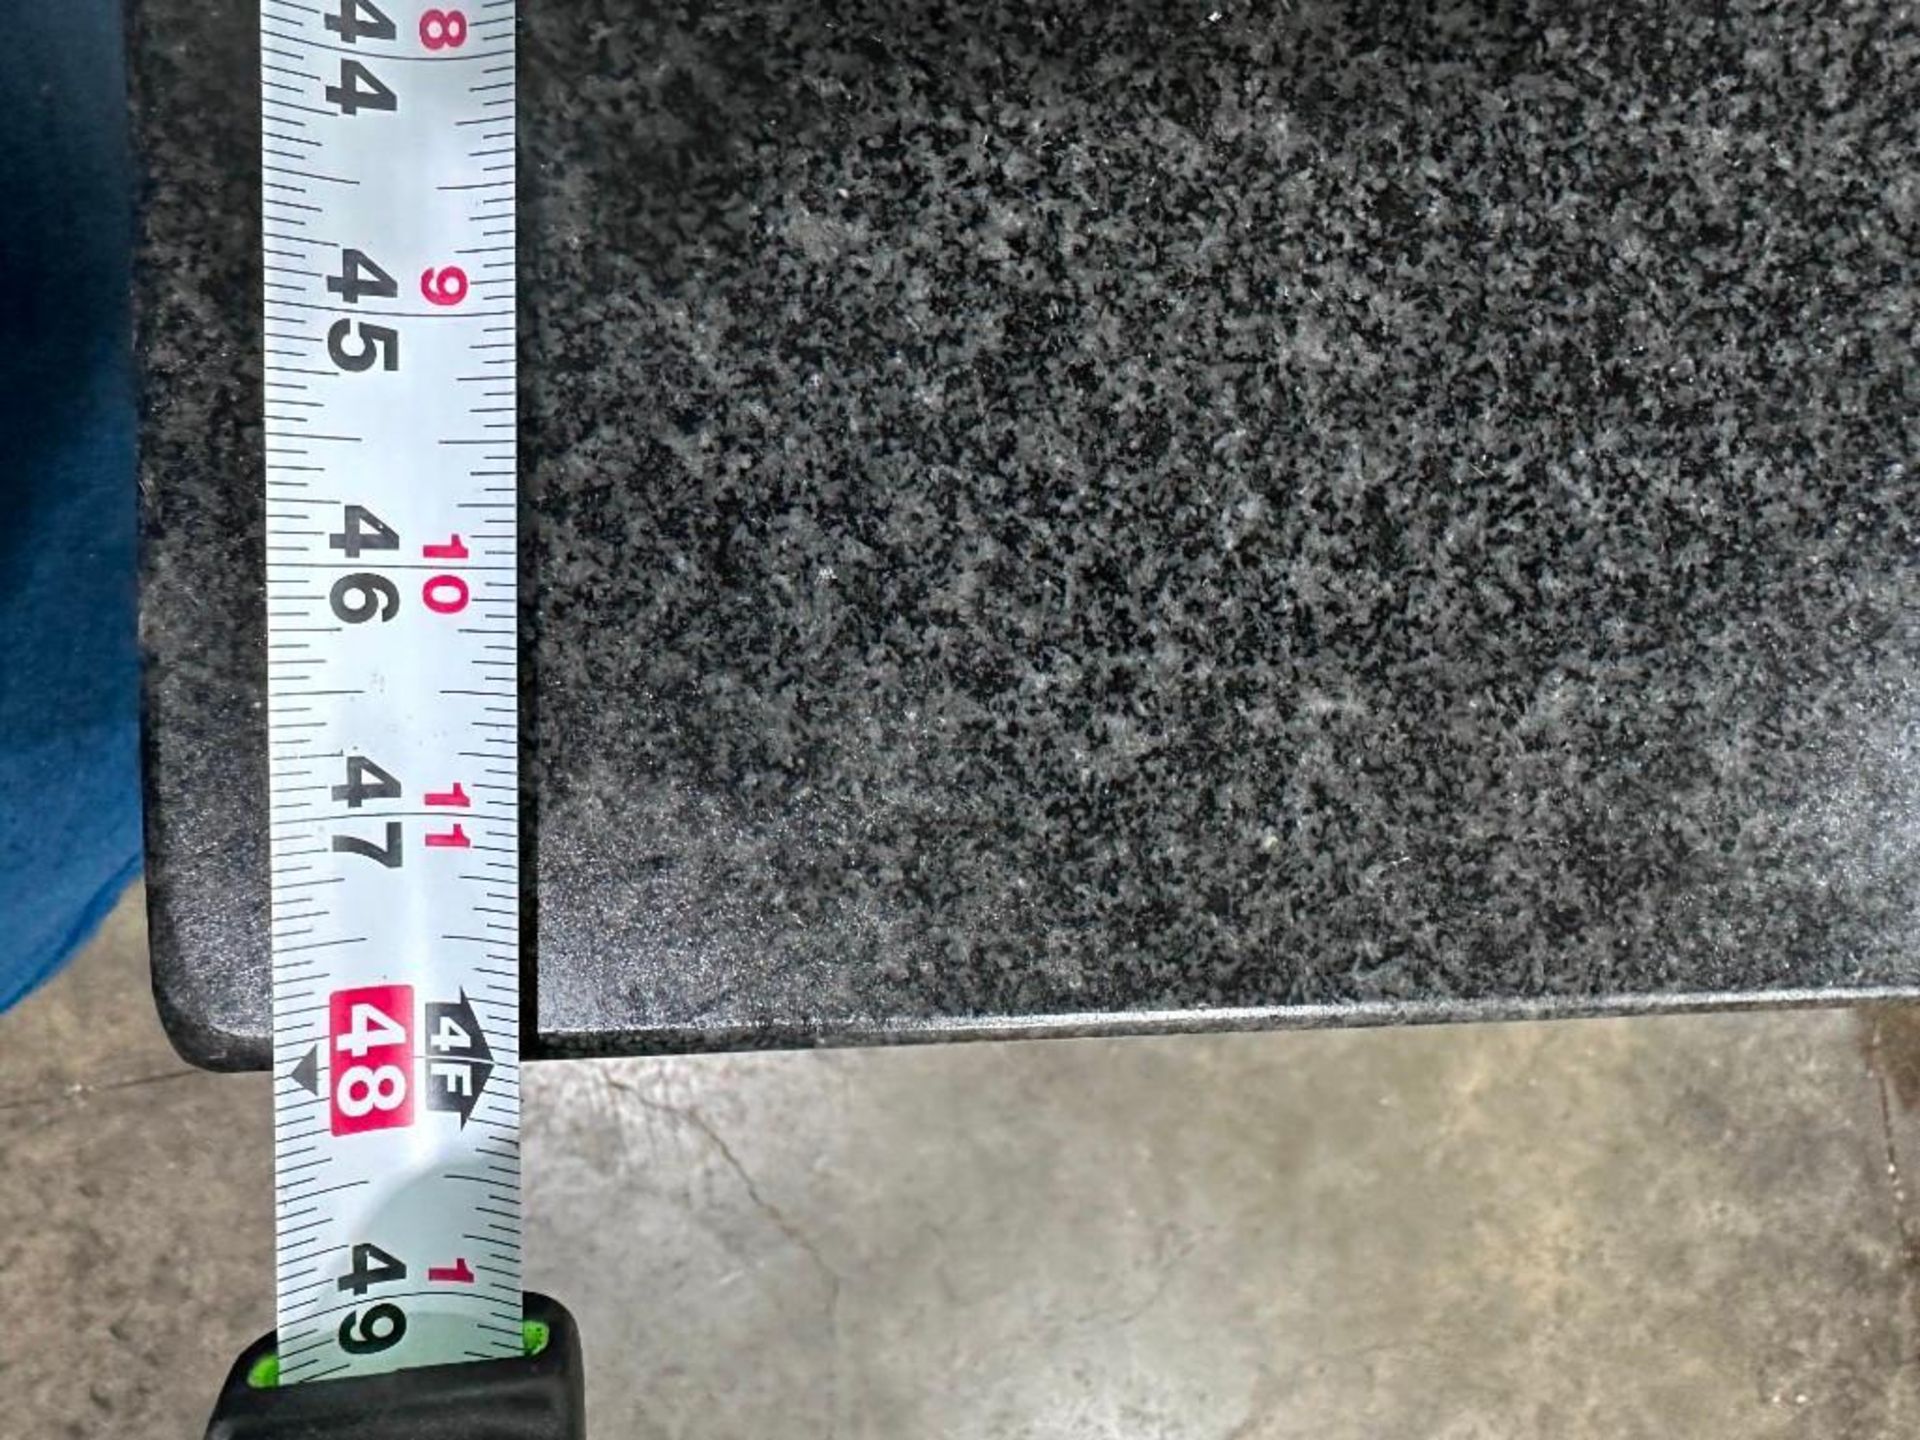 24" X 48" GRANITE  INSPECTION SURFACE PLATE WITH STAND - Image 4 of 5